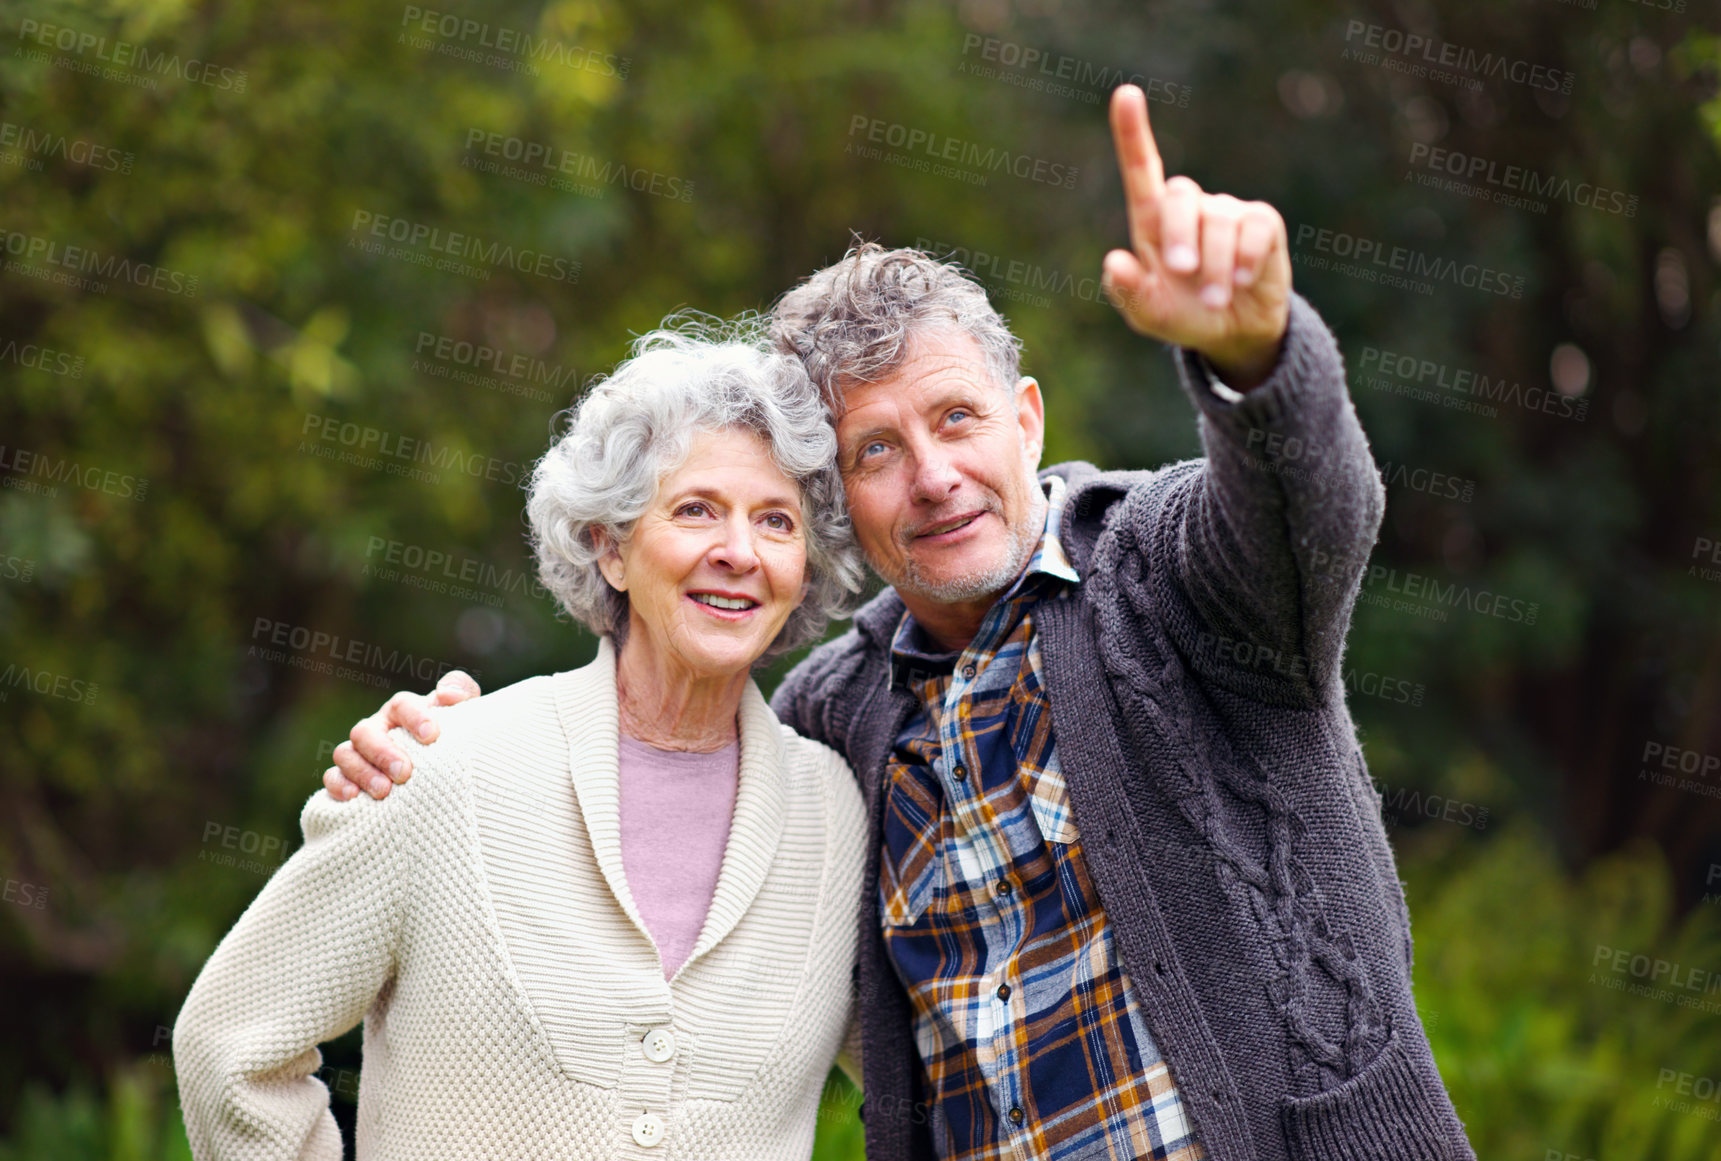 Buy stock photo Retired people, pointing or love to relax in garden by thinking, walking or planning happy holiday. Couple, vision or rest in nature park as conversation, happiness or memory of retirement dreams